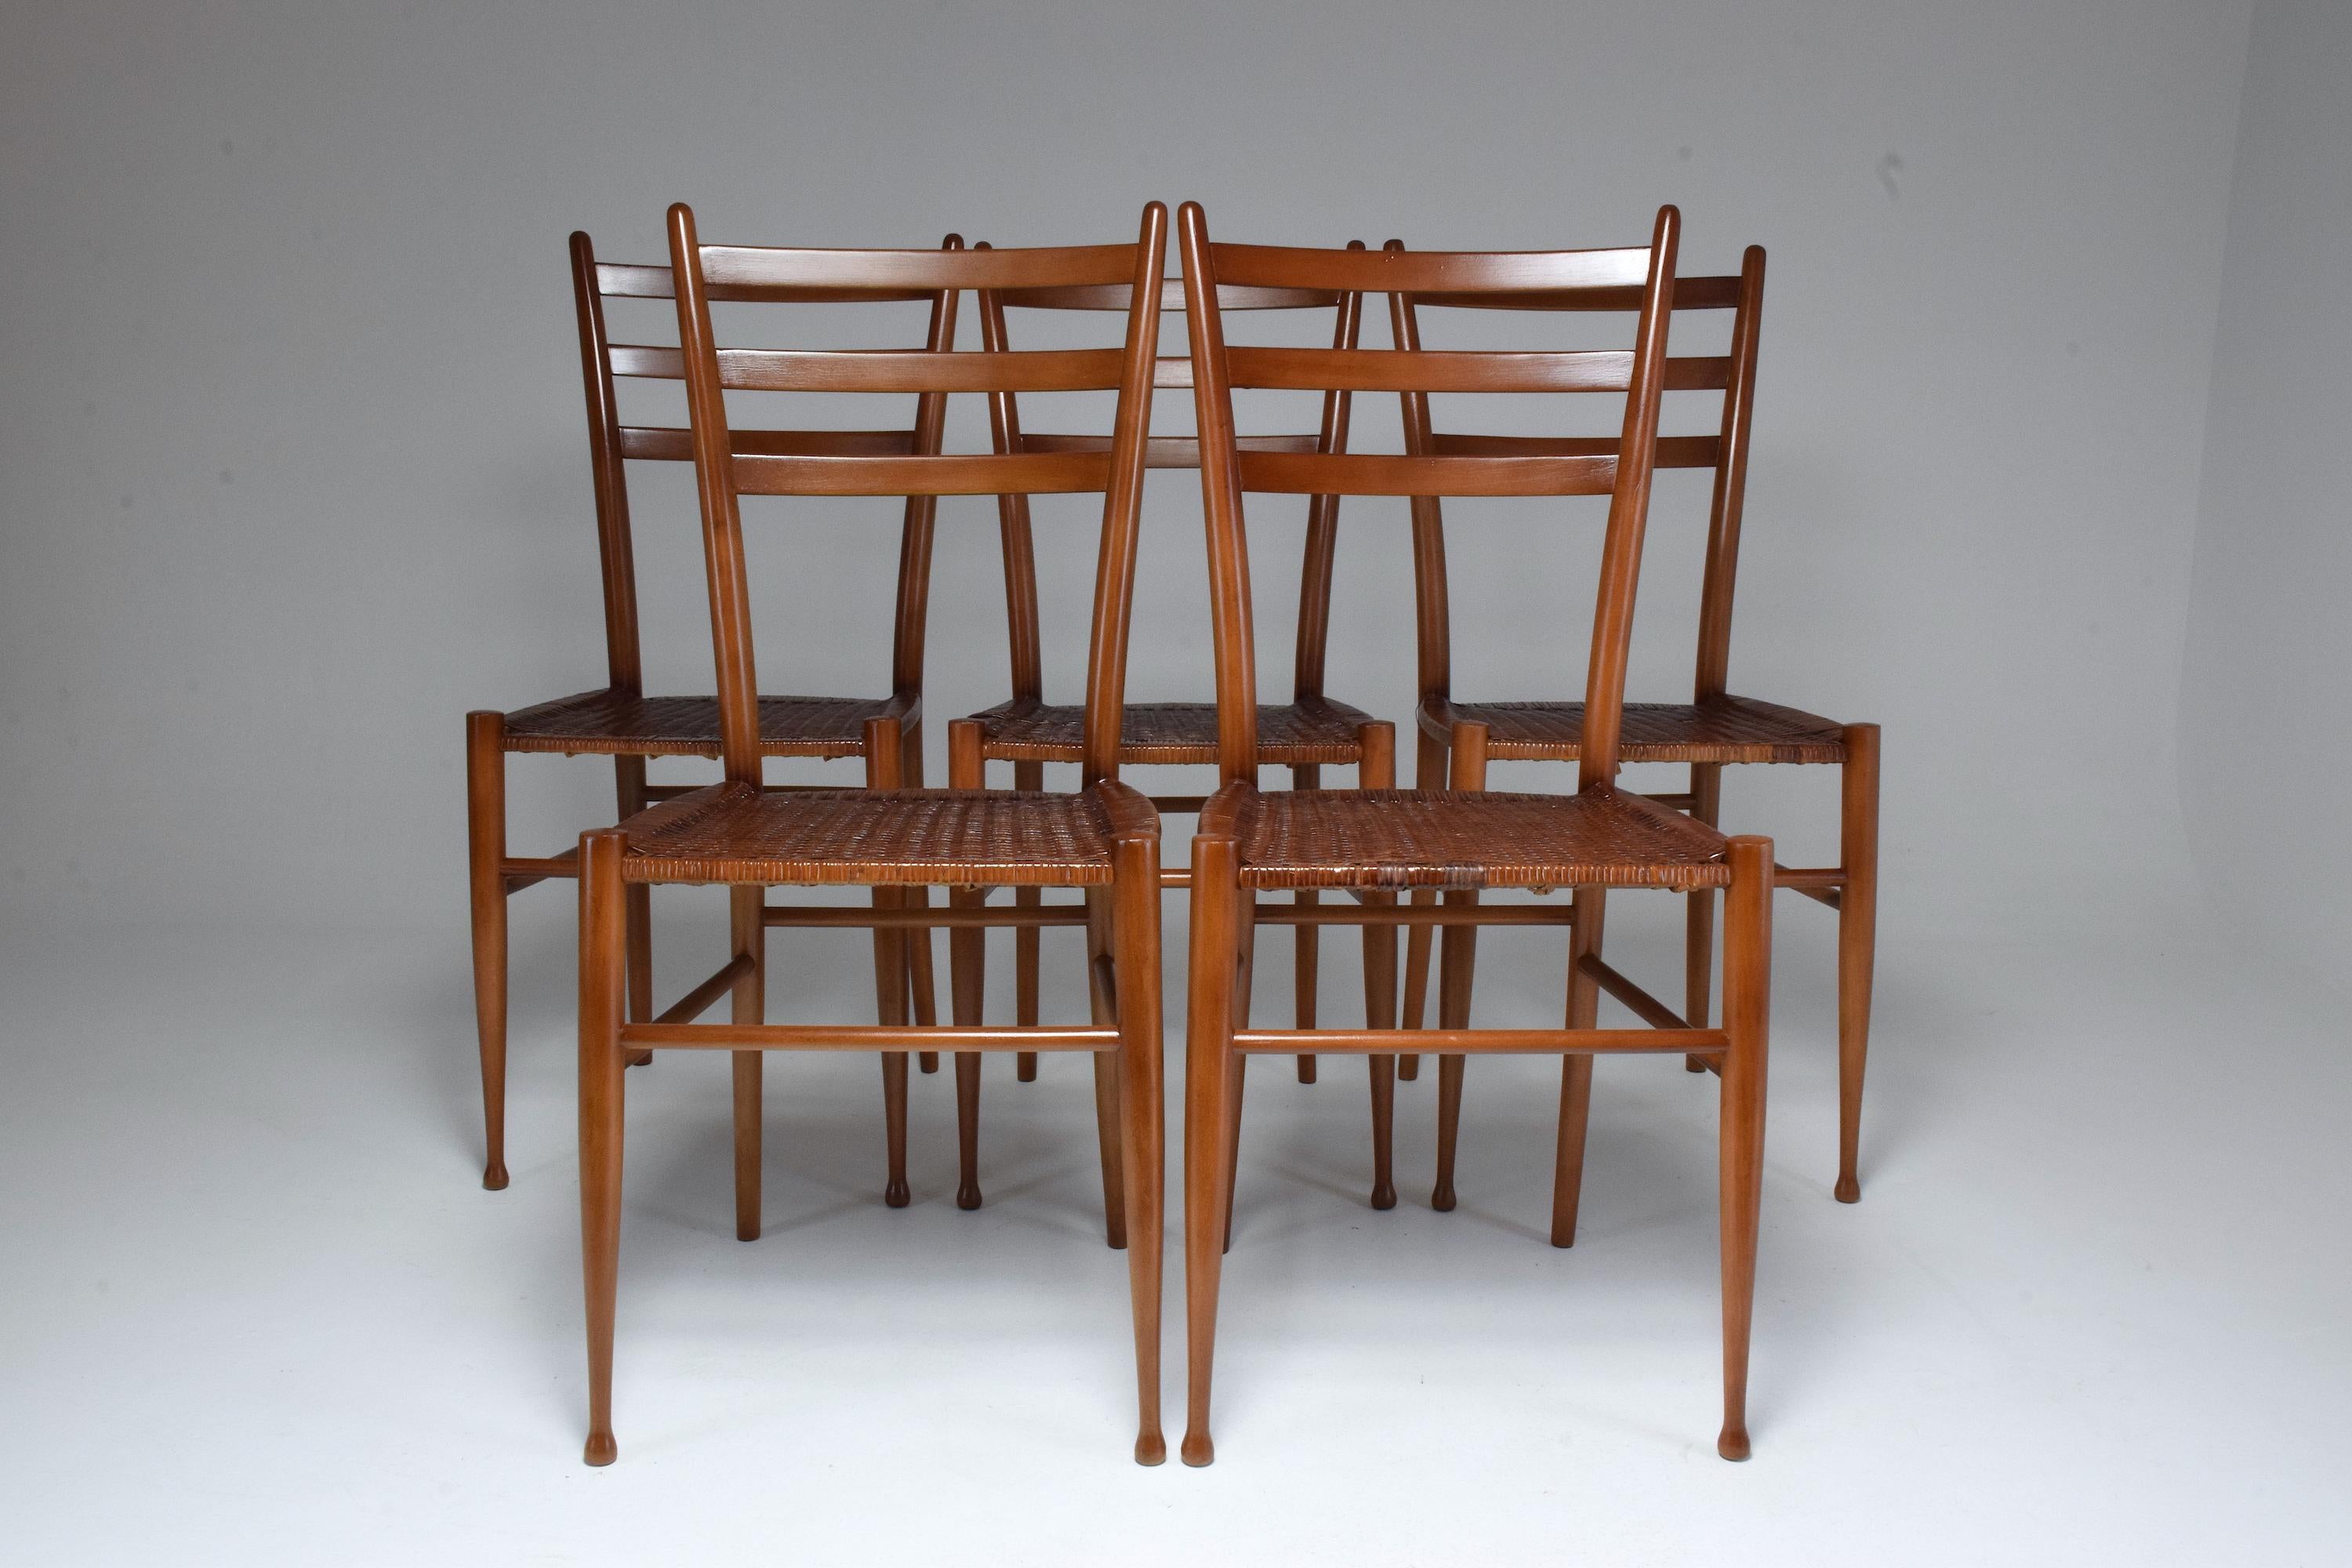 1930s dining chairs